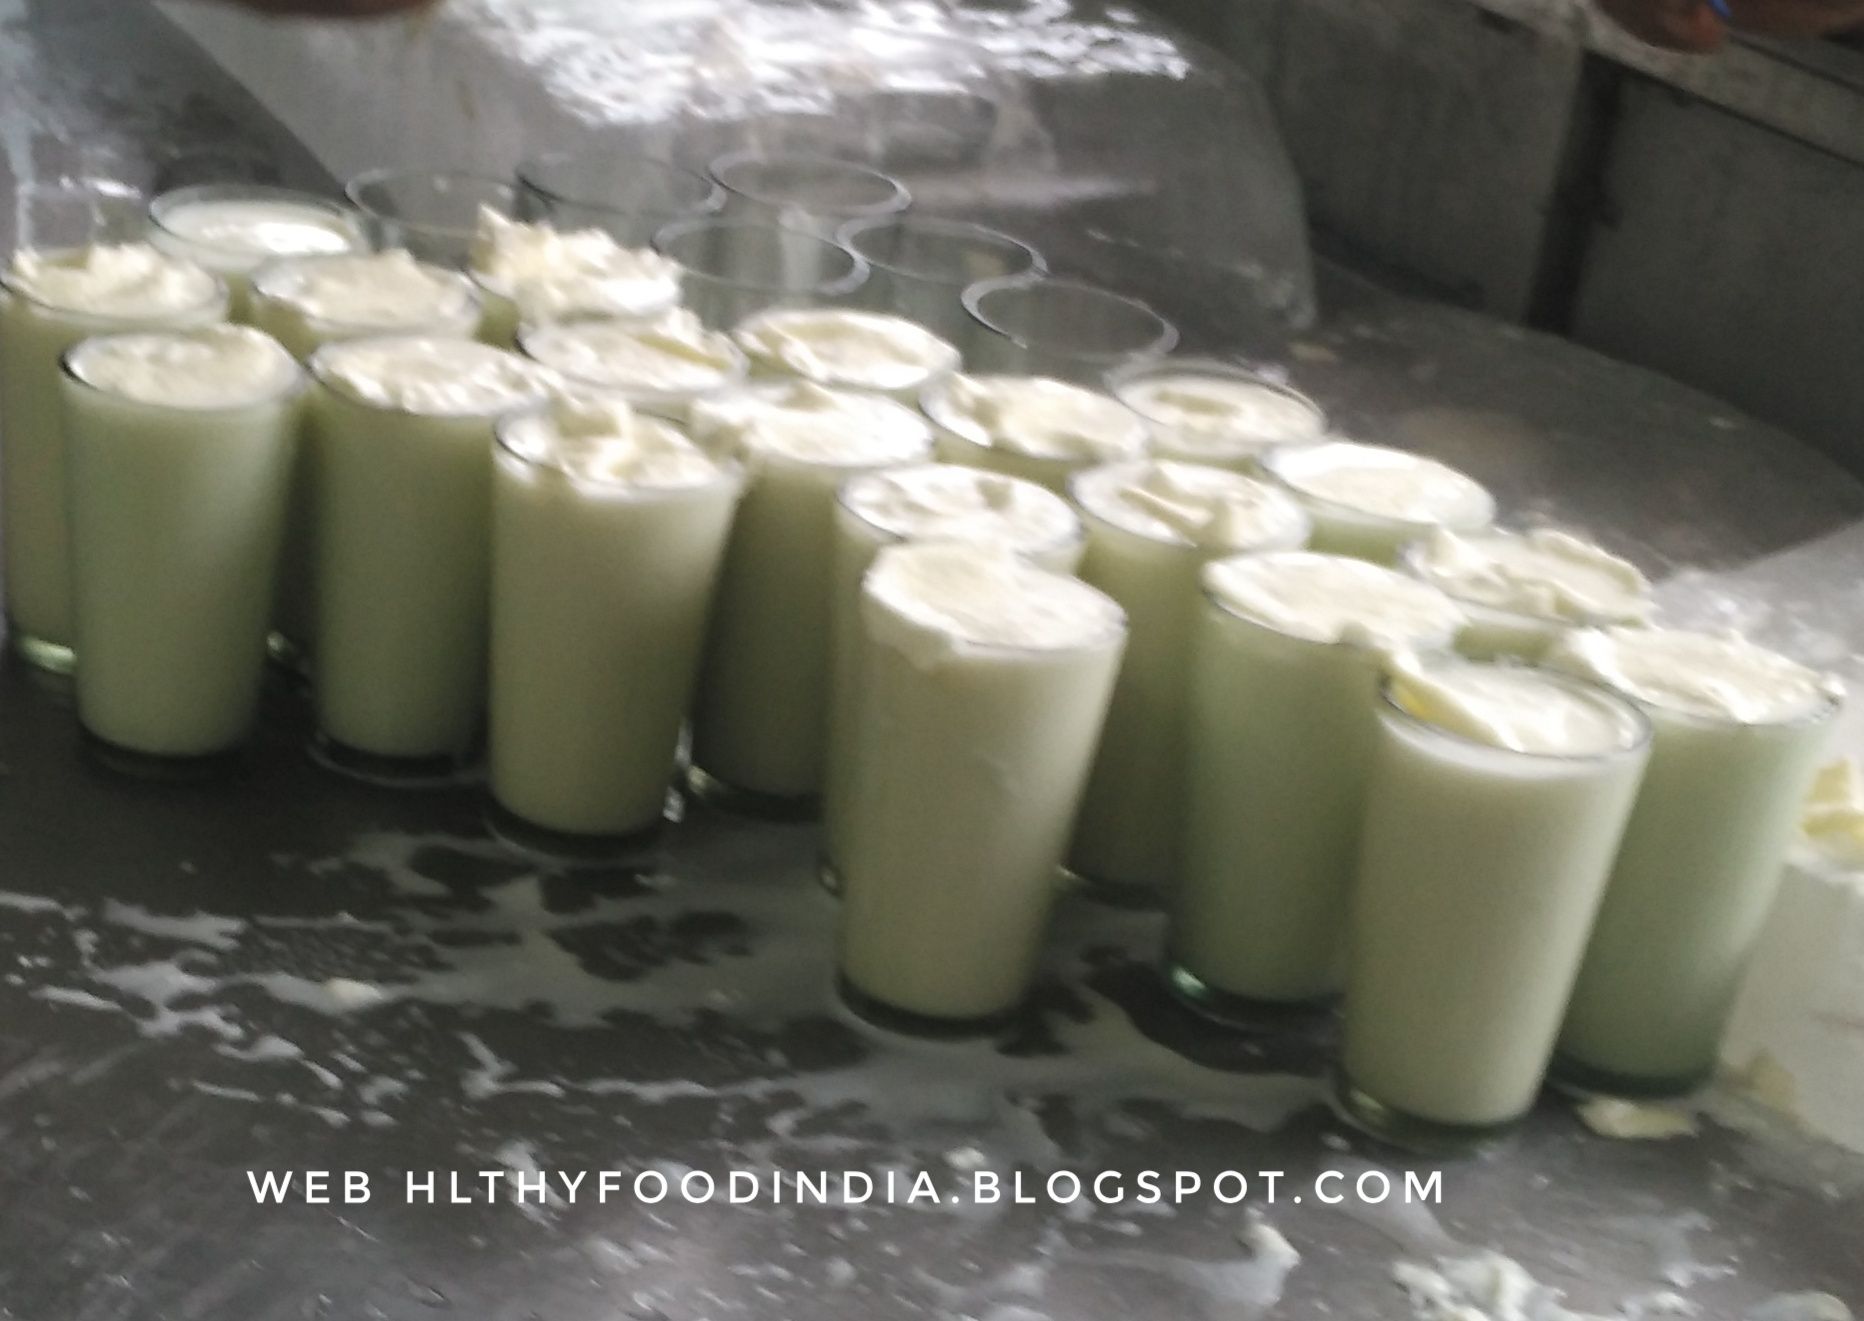 This is sweet diluted curd served chilled, called lassi in here